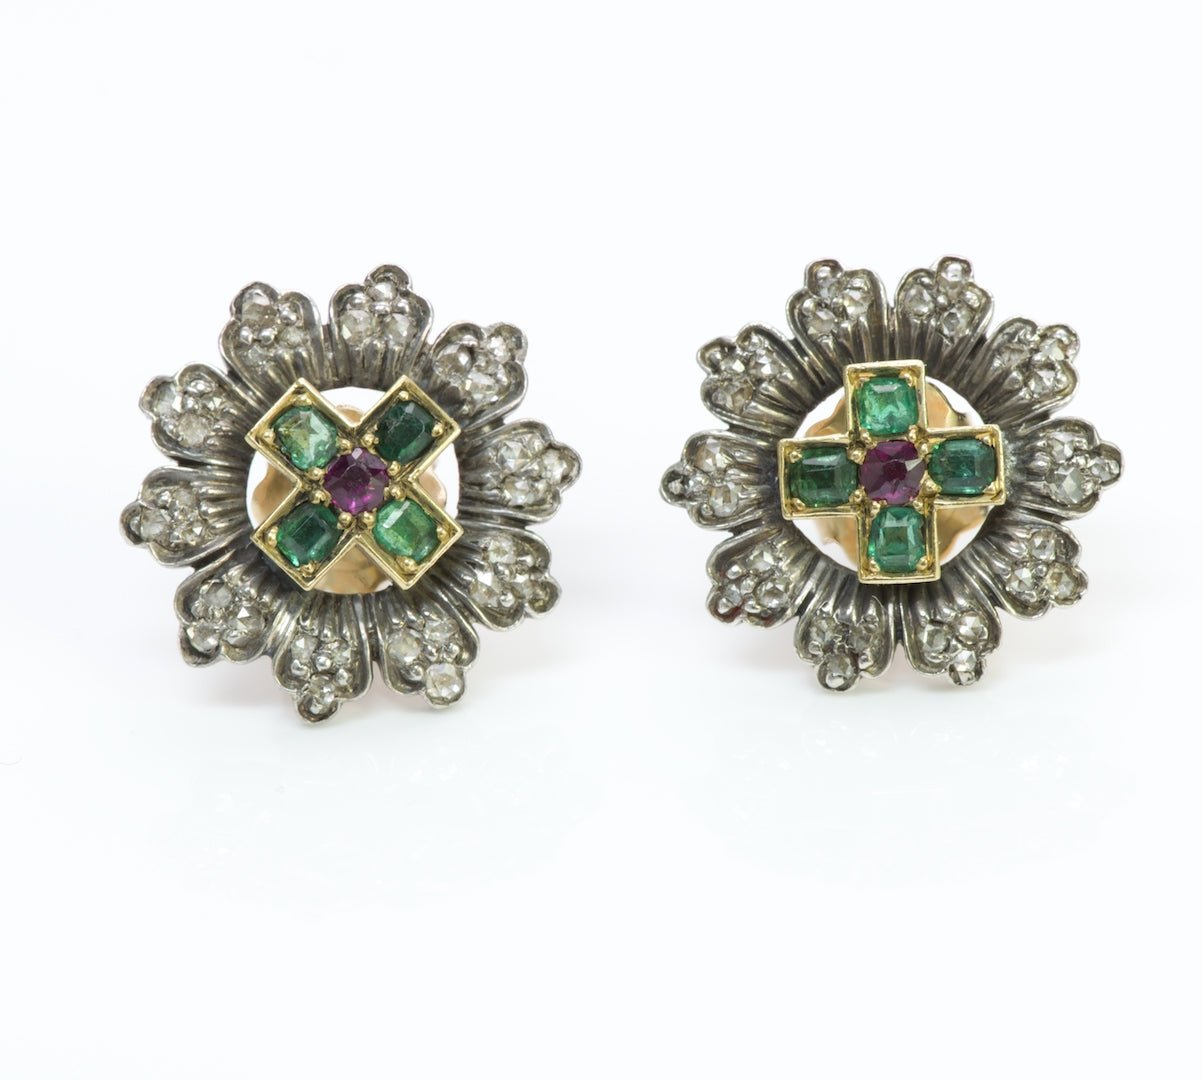 Antique Gold & Silver Emerald Diamond Ruby Earrings - DSF Antique Jewelry